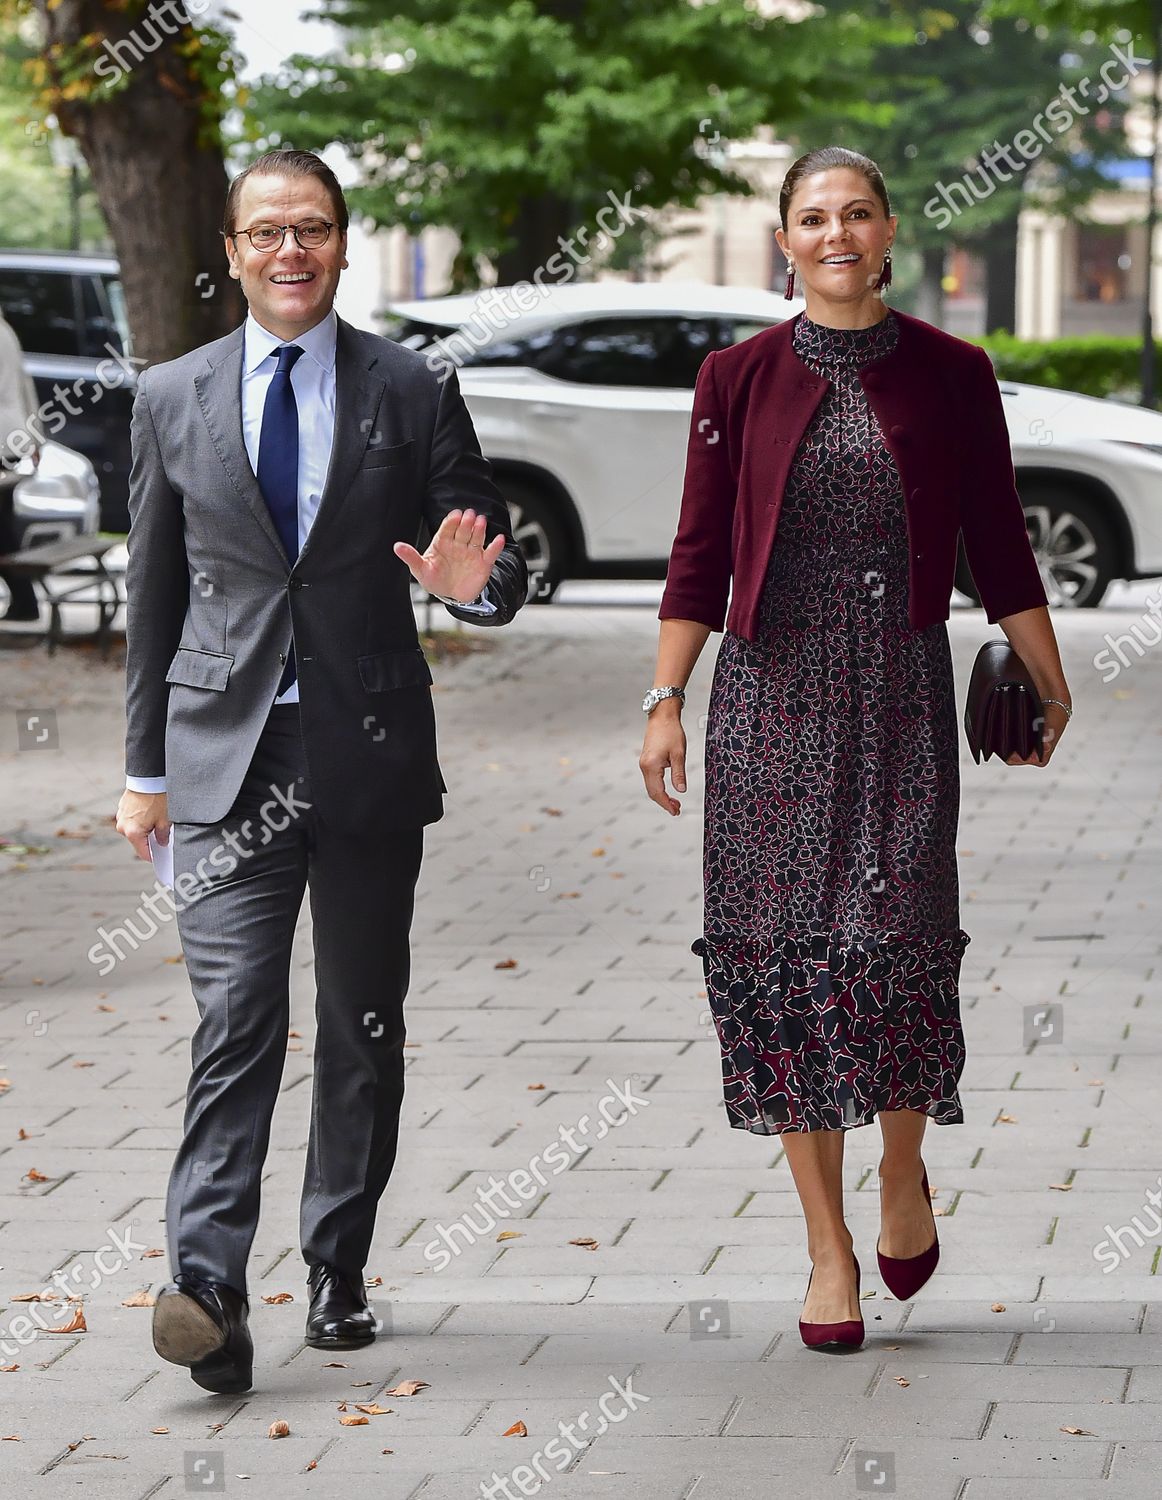 prince-daniel-and-crown-princess-victoria-visit-the-maxim-theater-stockholm-sweden-shutterstock-editorial-10817556o.jpg